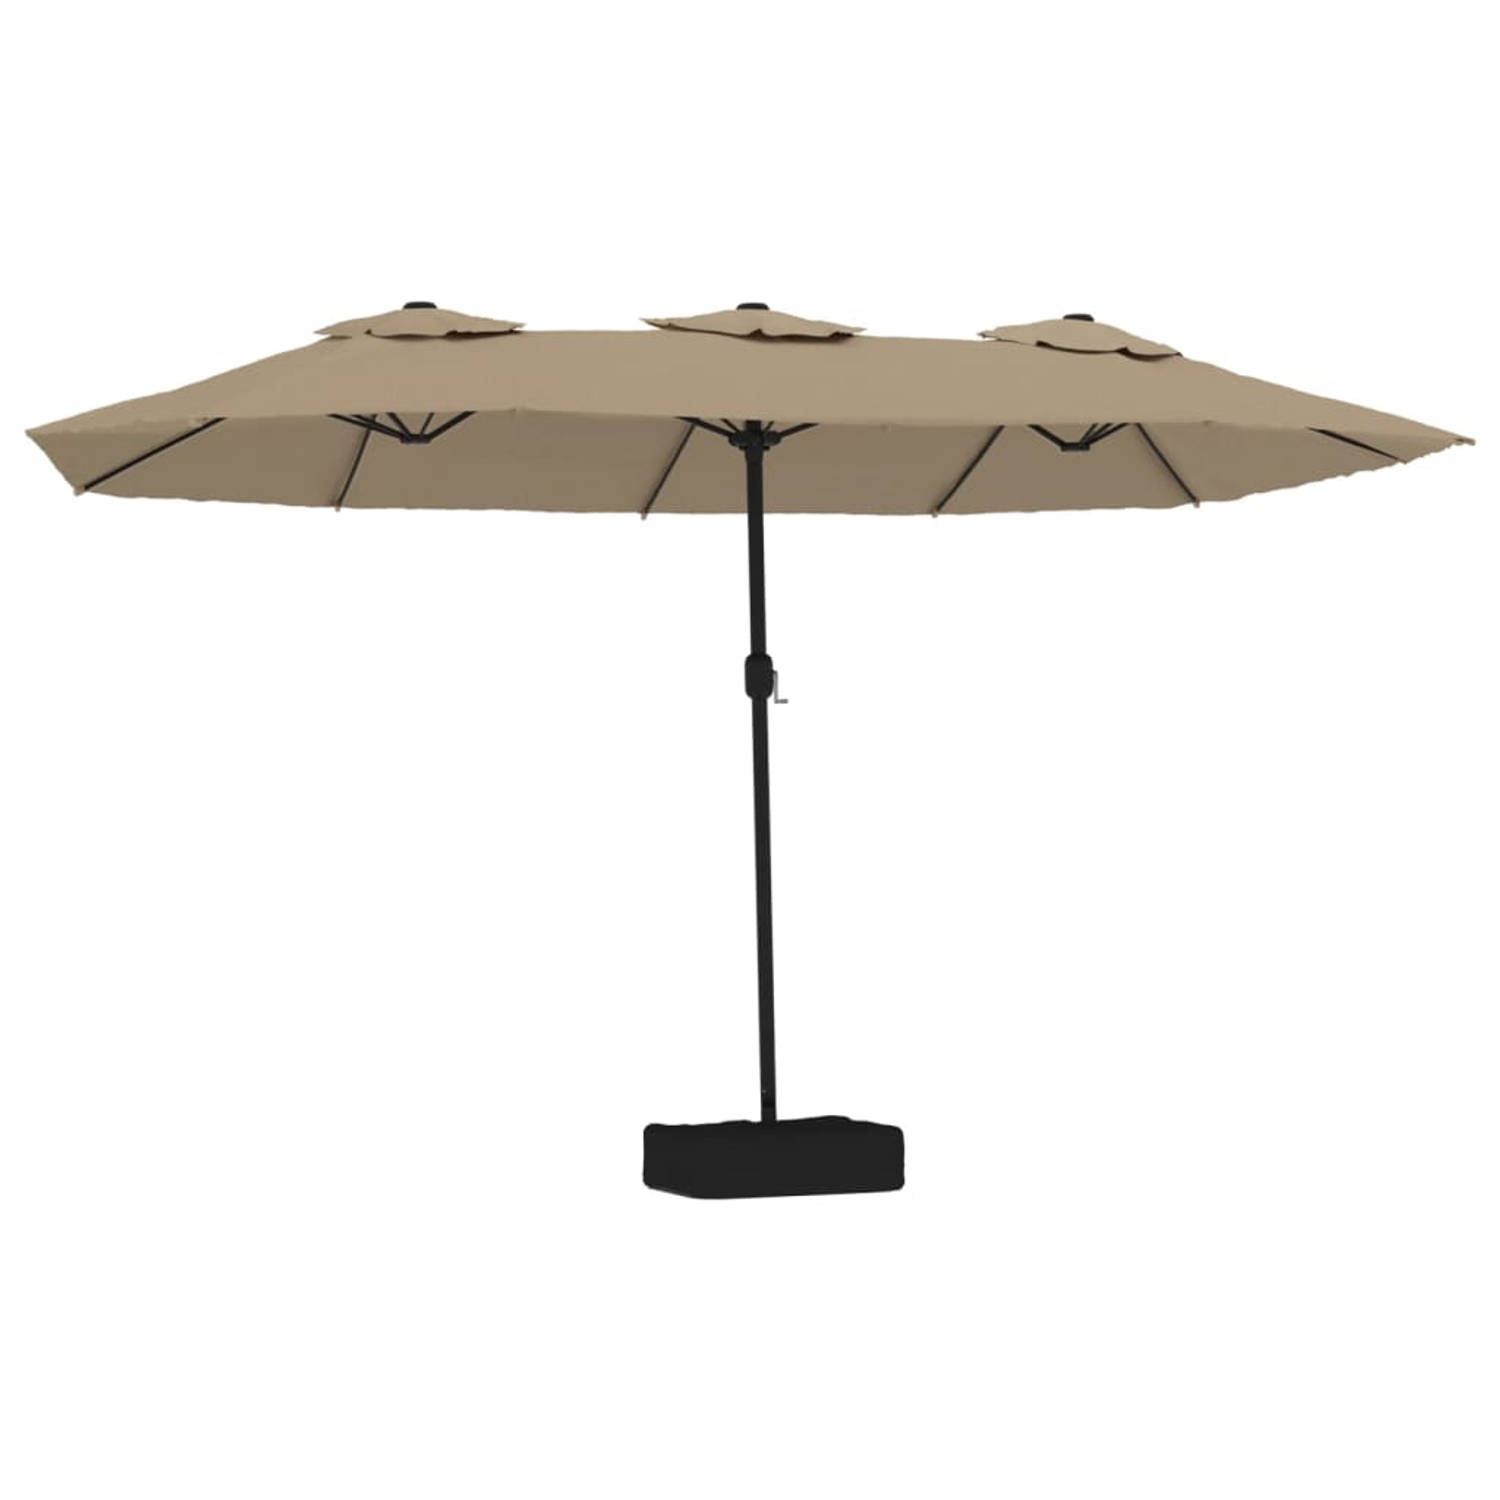 The Living Store Dubbele Parasol - Taupe en Donkergrijs - 449 x 265 x 245 cm - LED-verlichting - Duurzaam Polyester - Sterk Frame